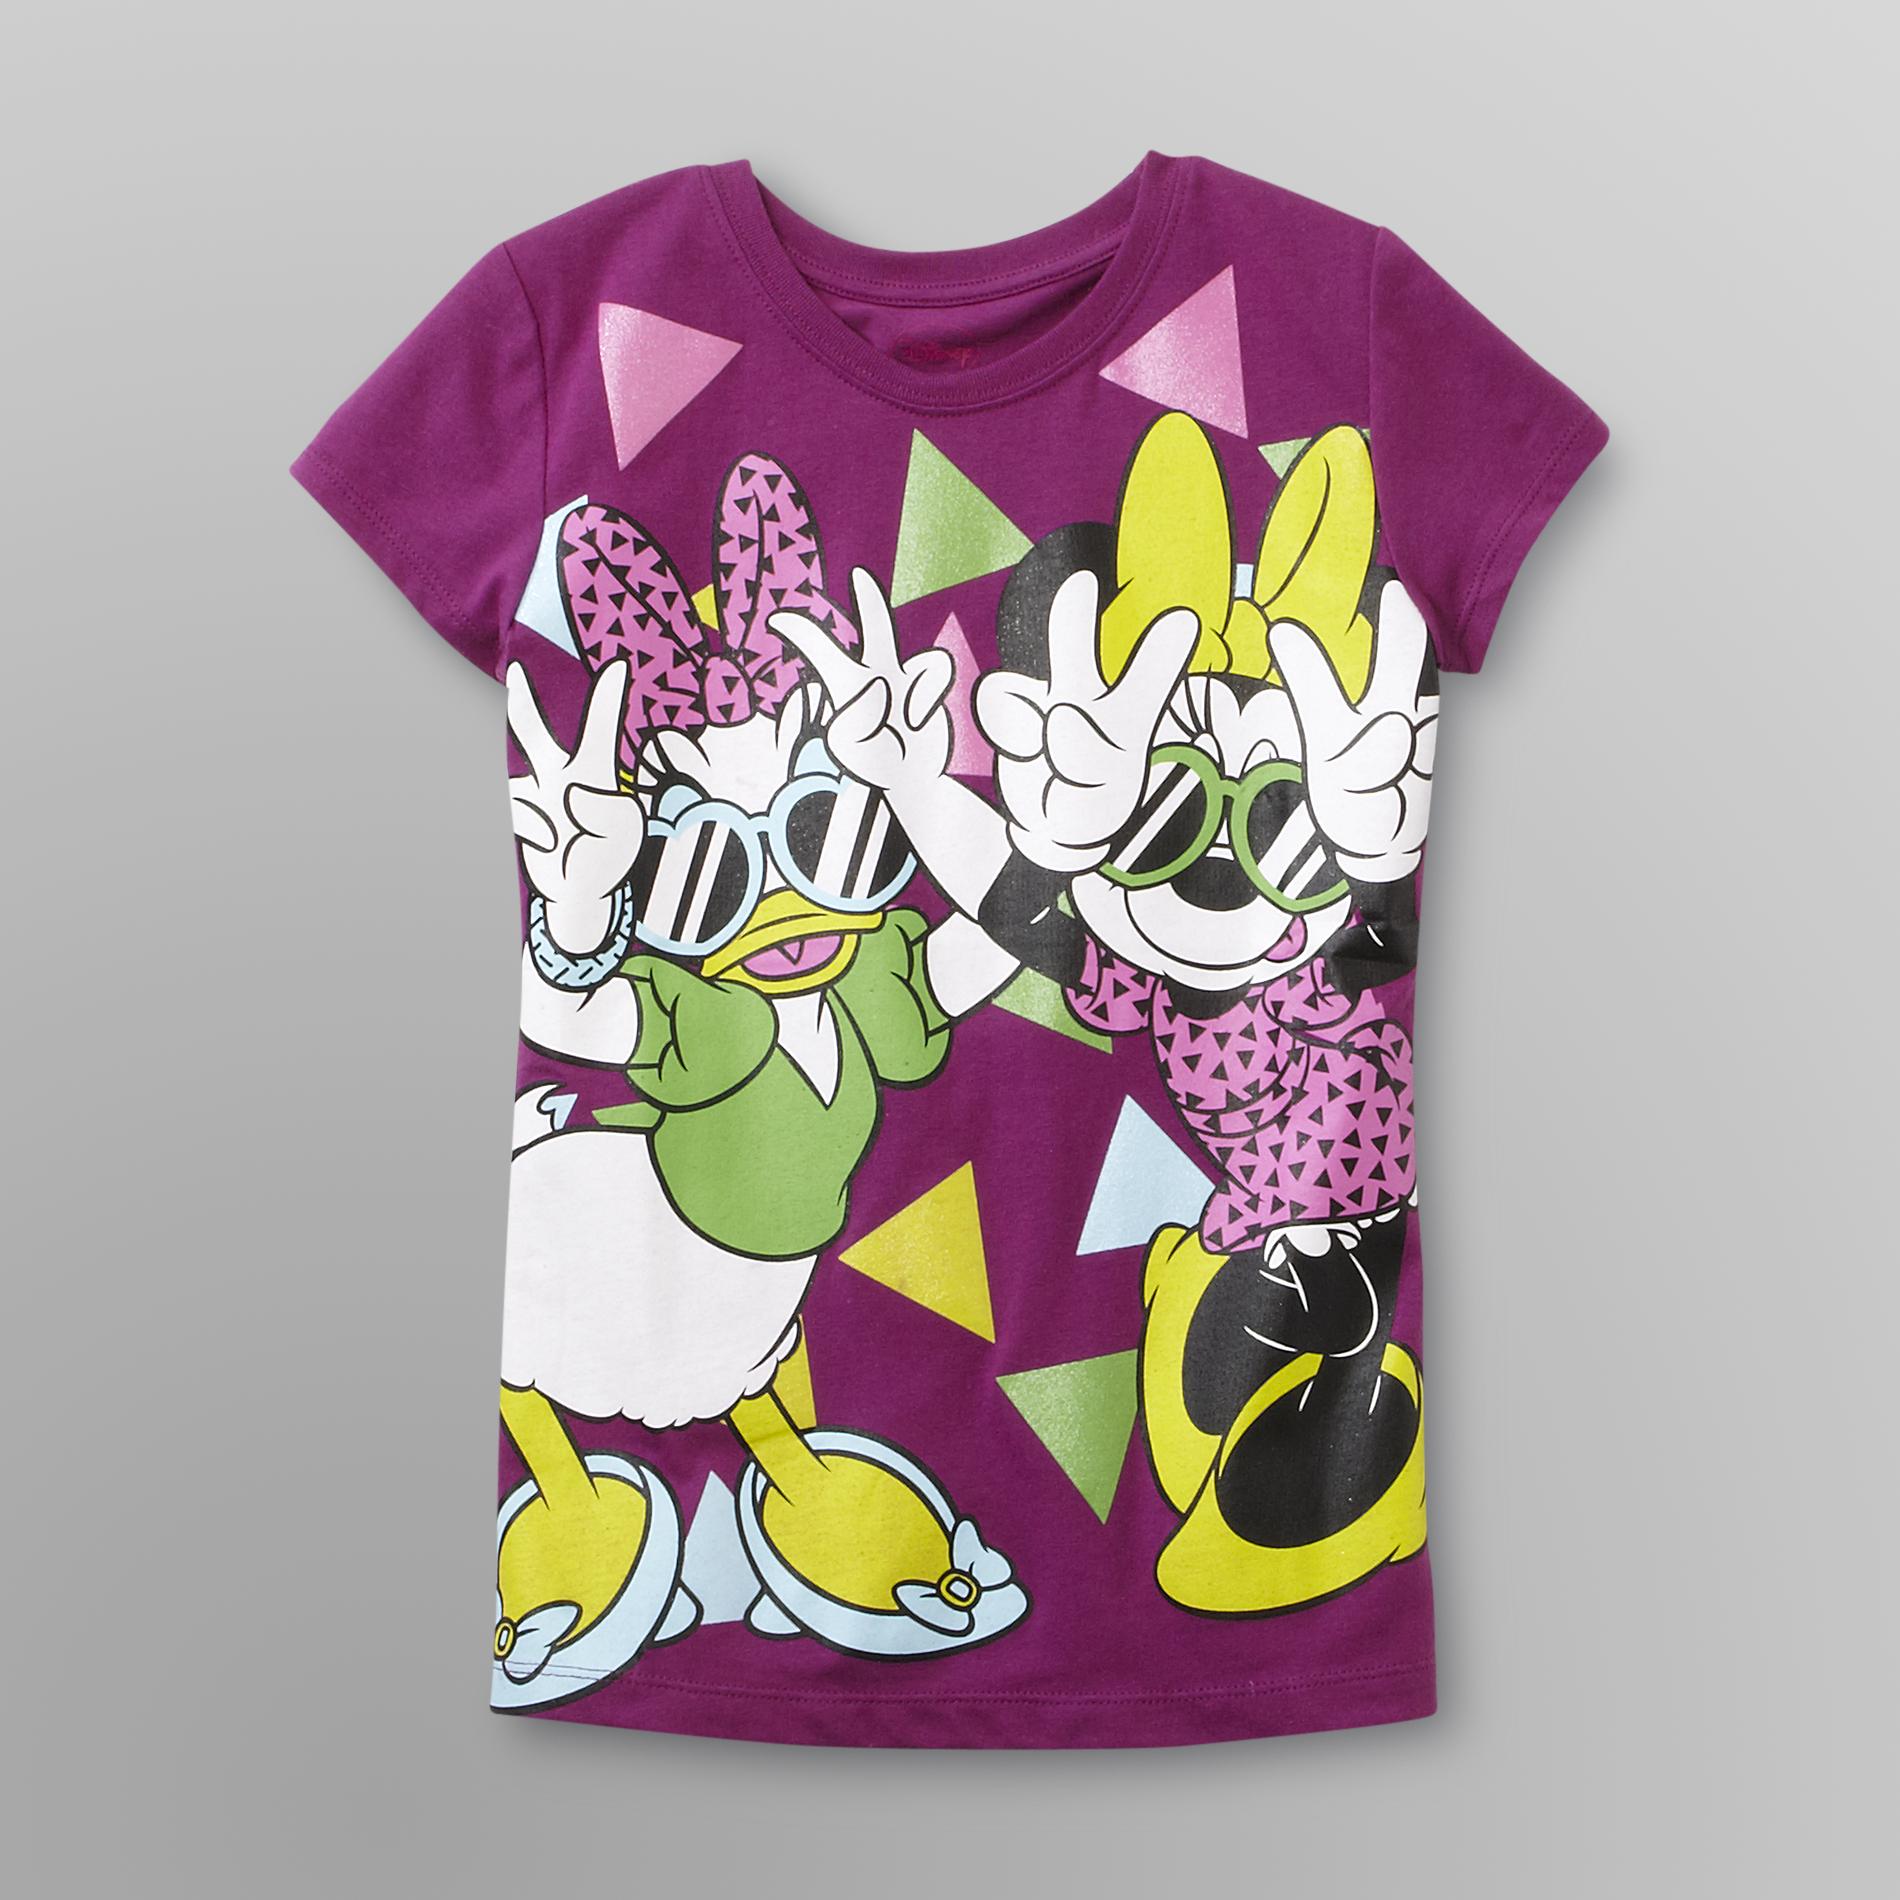 Disney Minnie Mouse & Daisy Duck Girl's Graphic T-Shirt